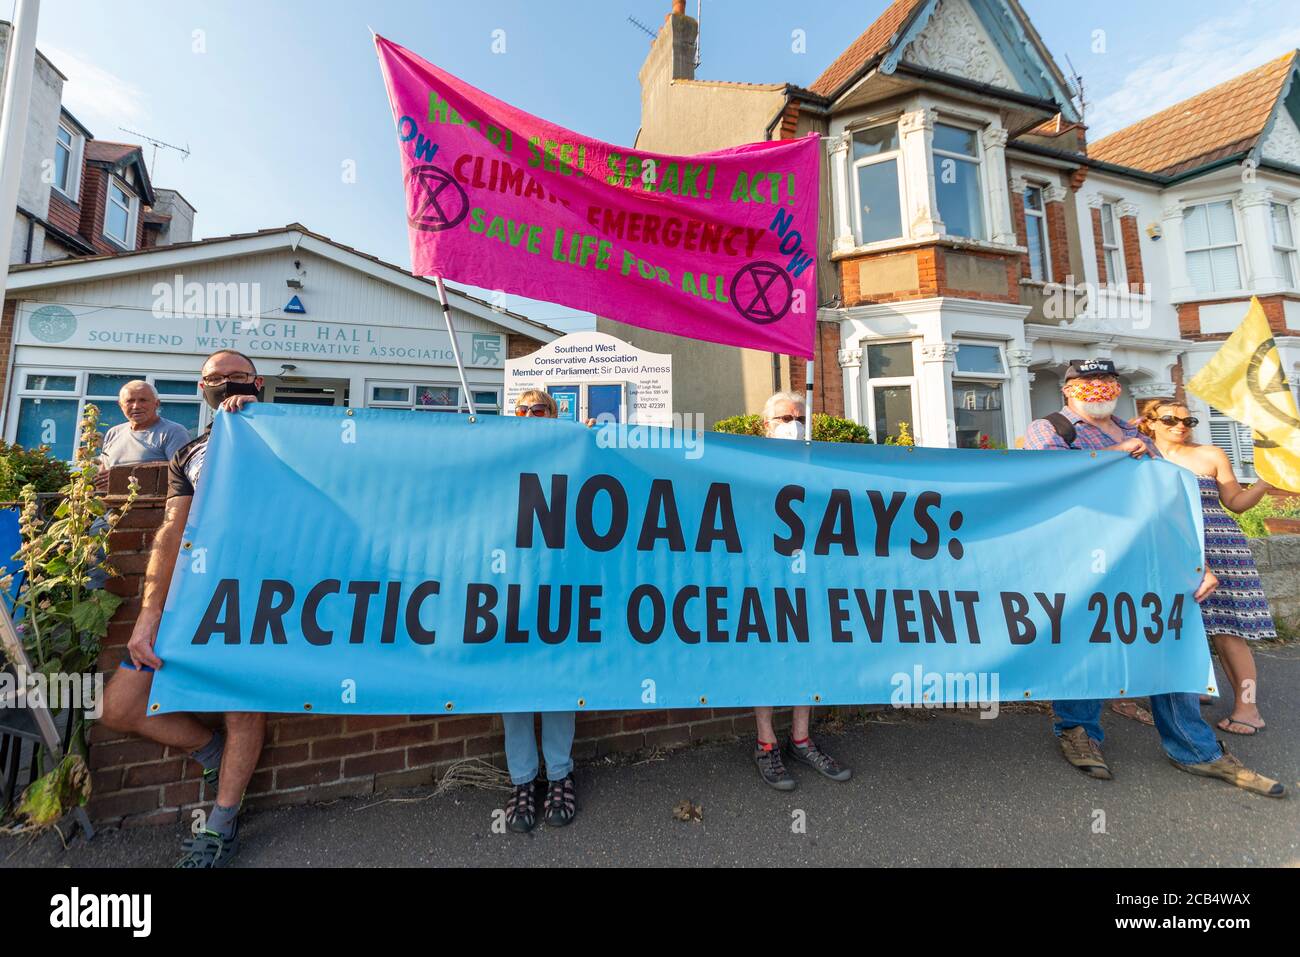 Extinction Rebellion, Southend branch, carried out a climate change protest outside Southend West MP Conservative office. NOAA arctic sea ice decline Stock Photo